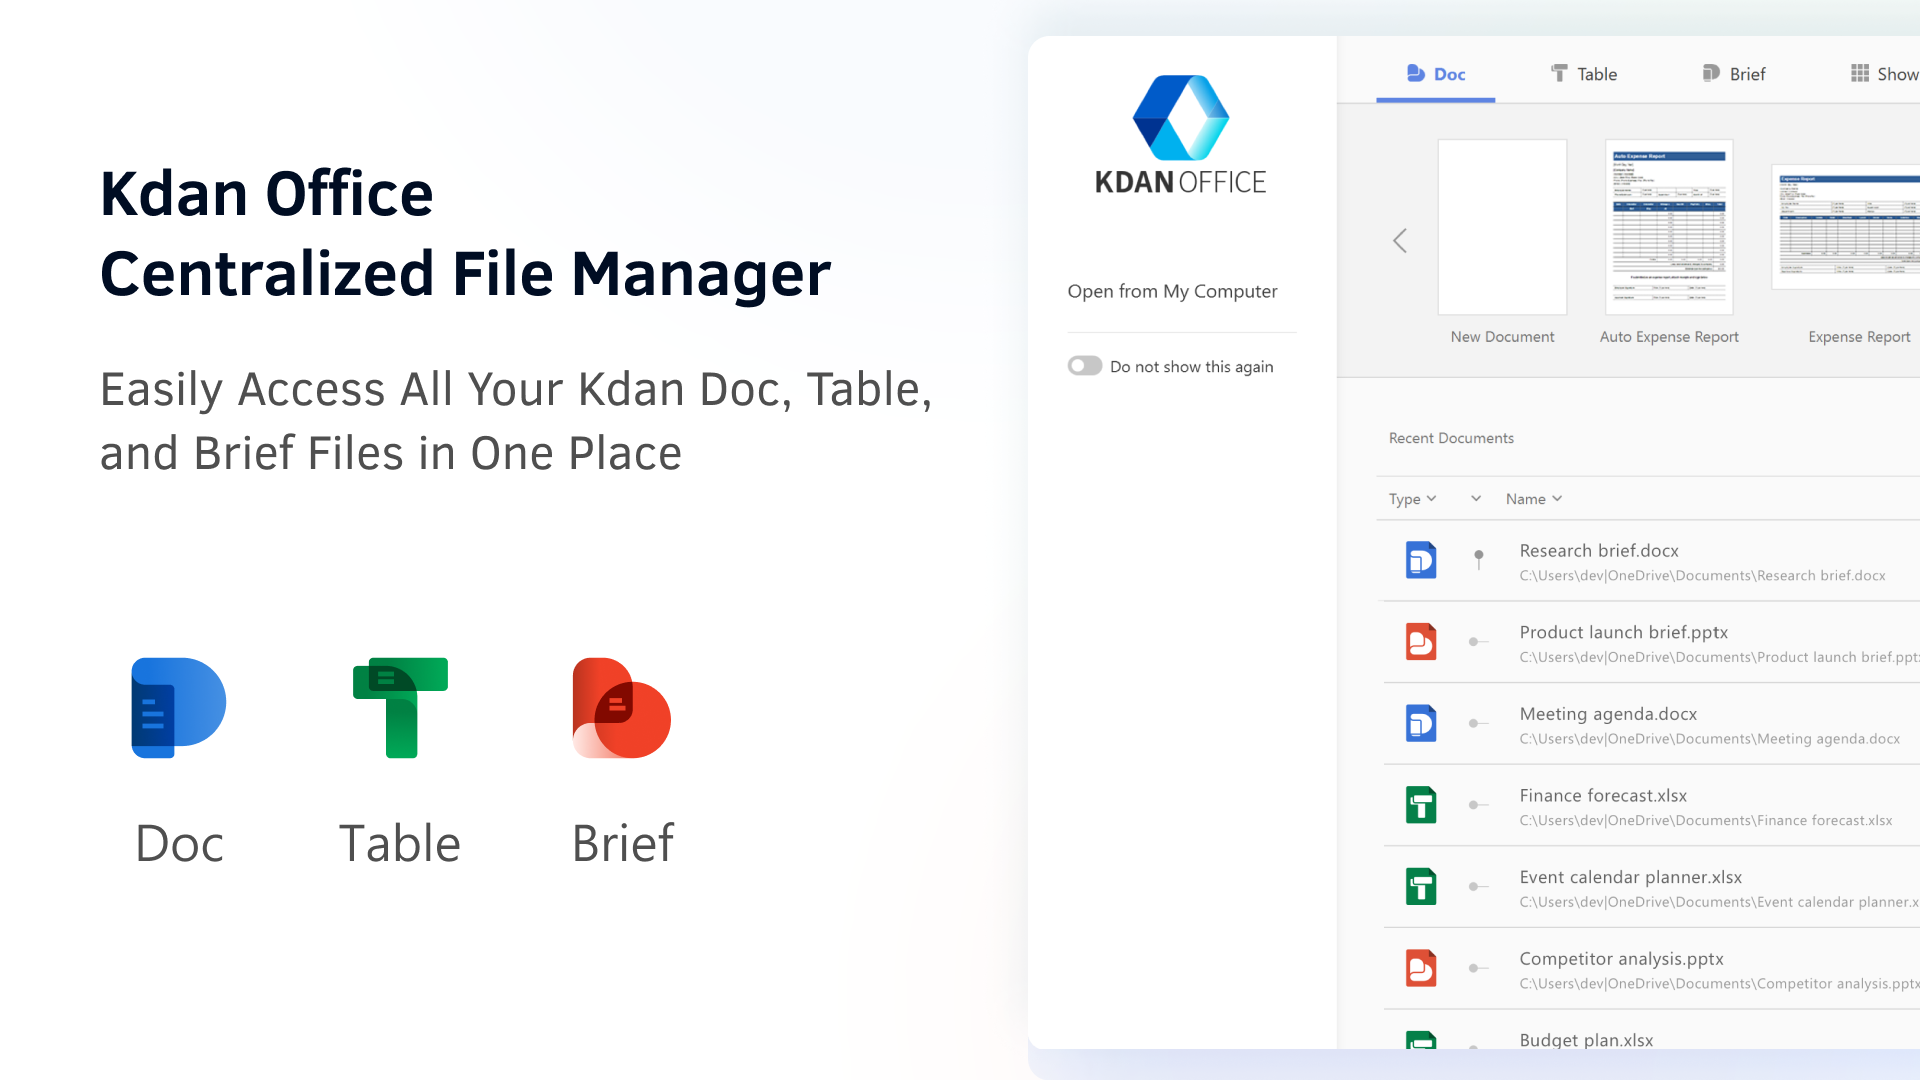 Kdan Office centralized File Manager